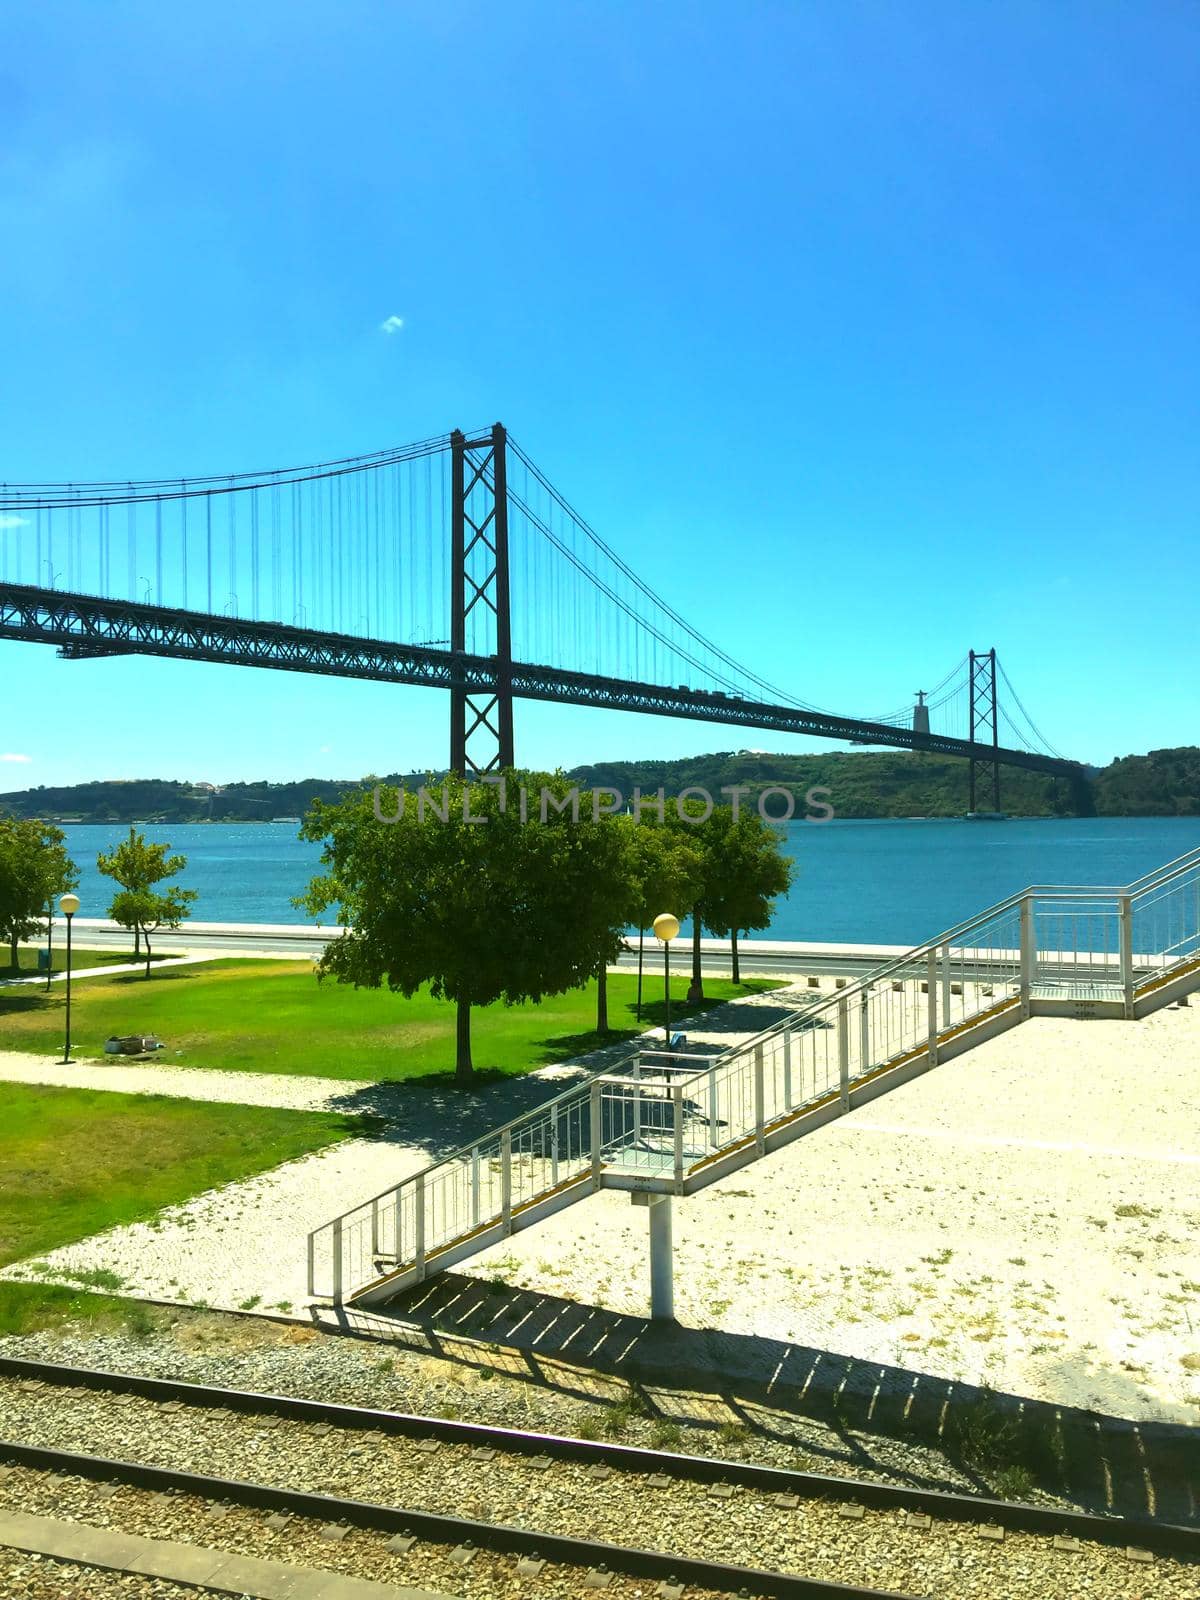 View of the bridge, summer day, Lisbon, Portugal